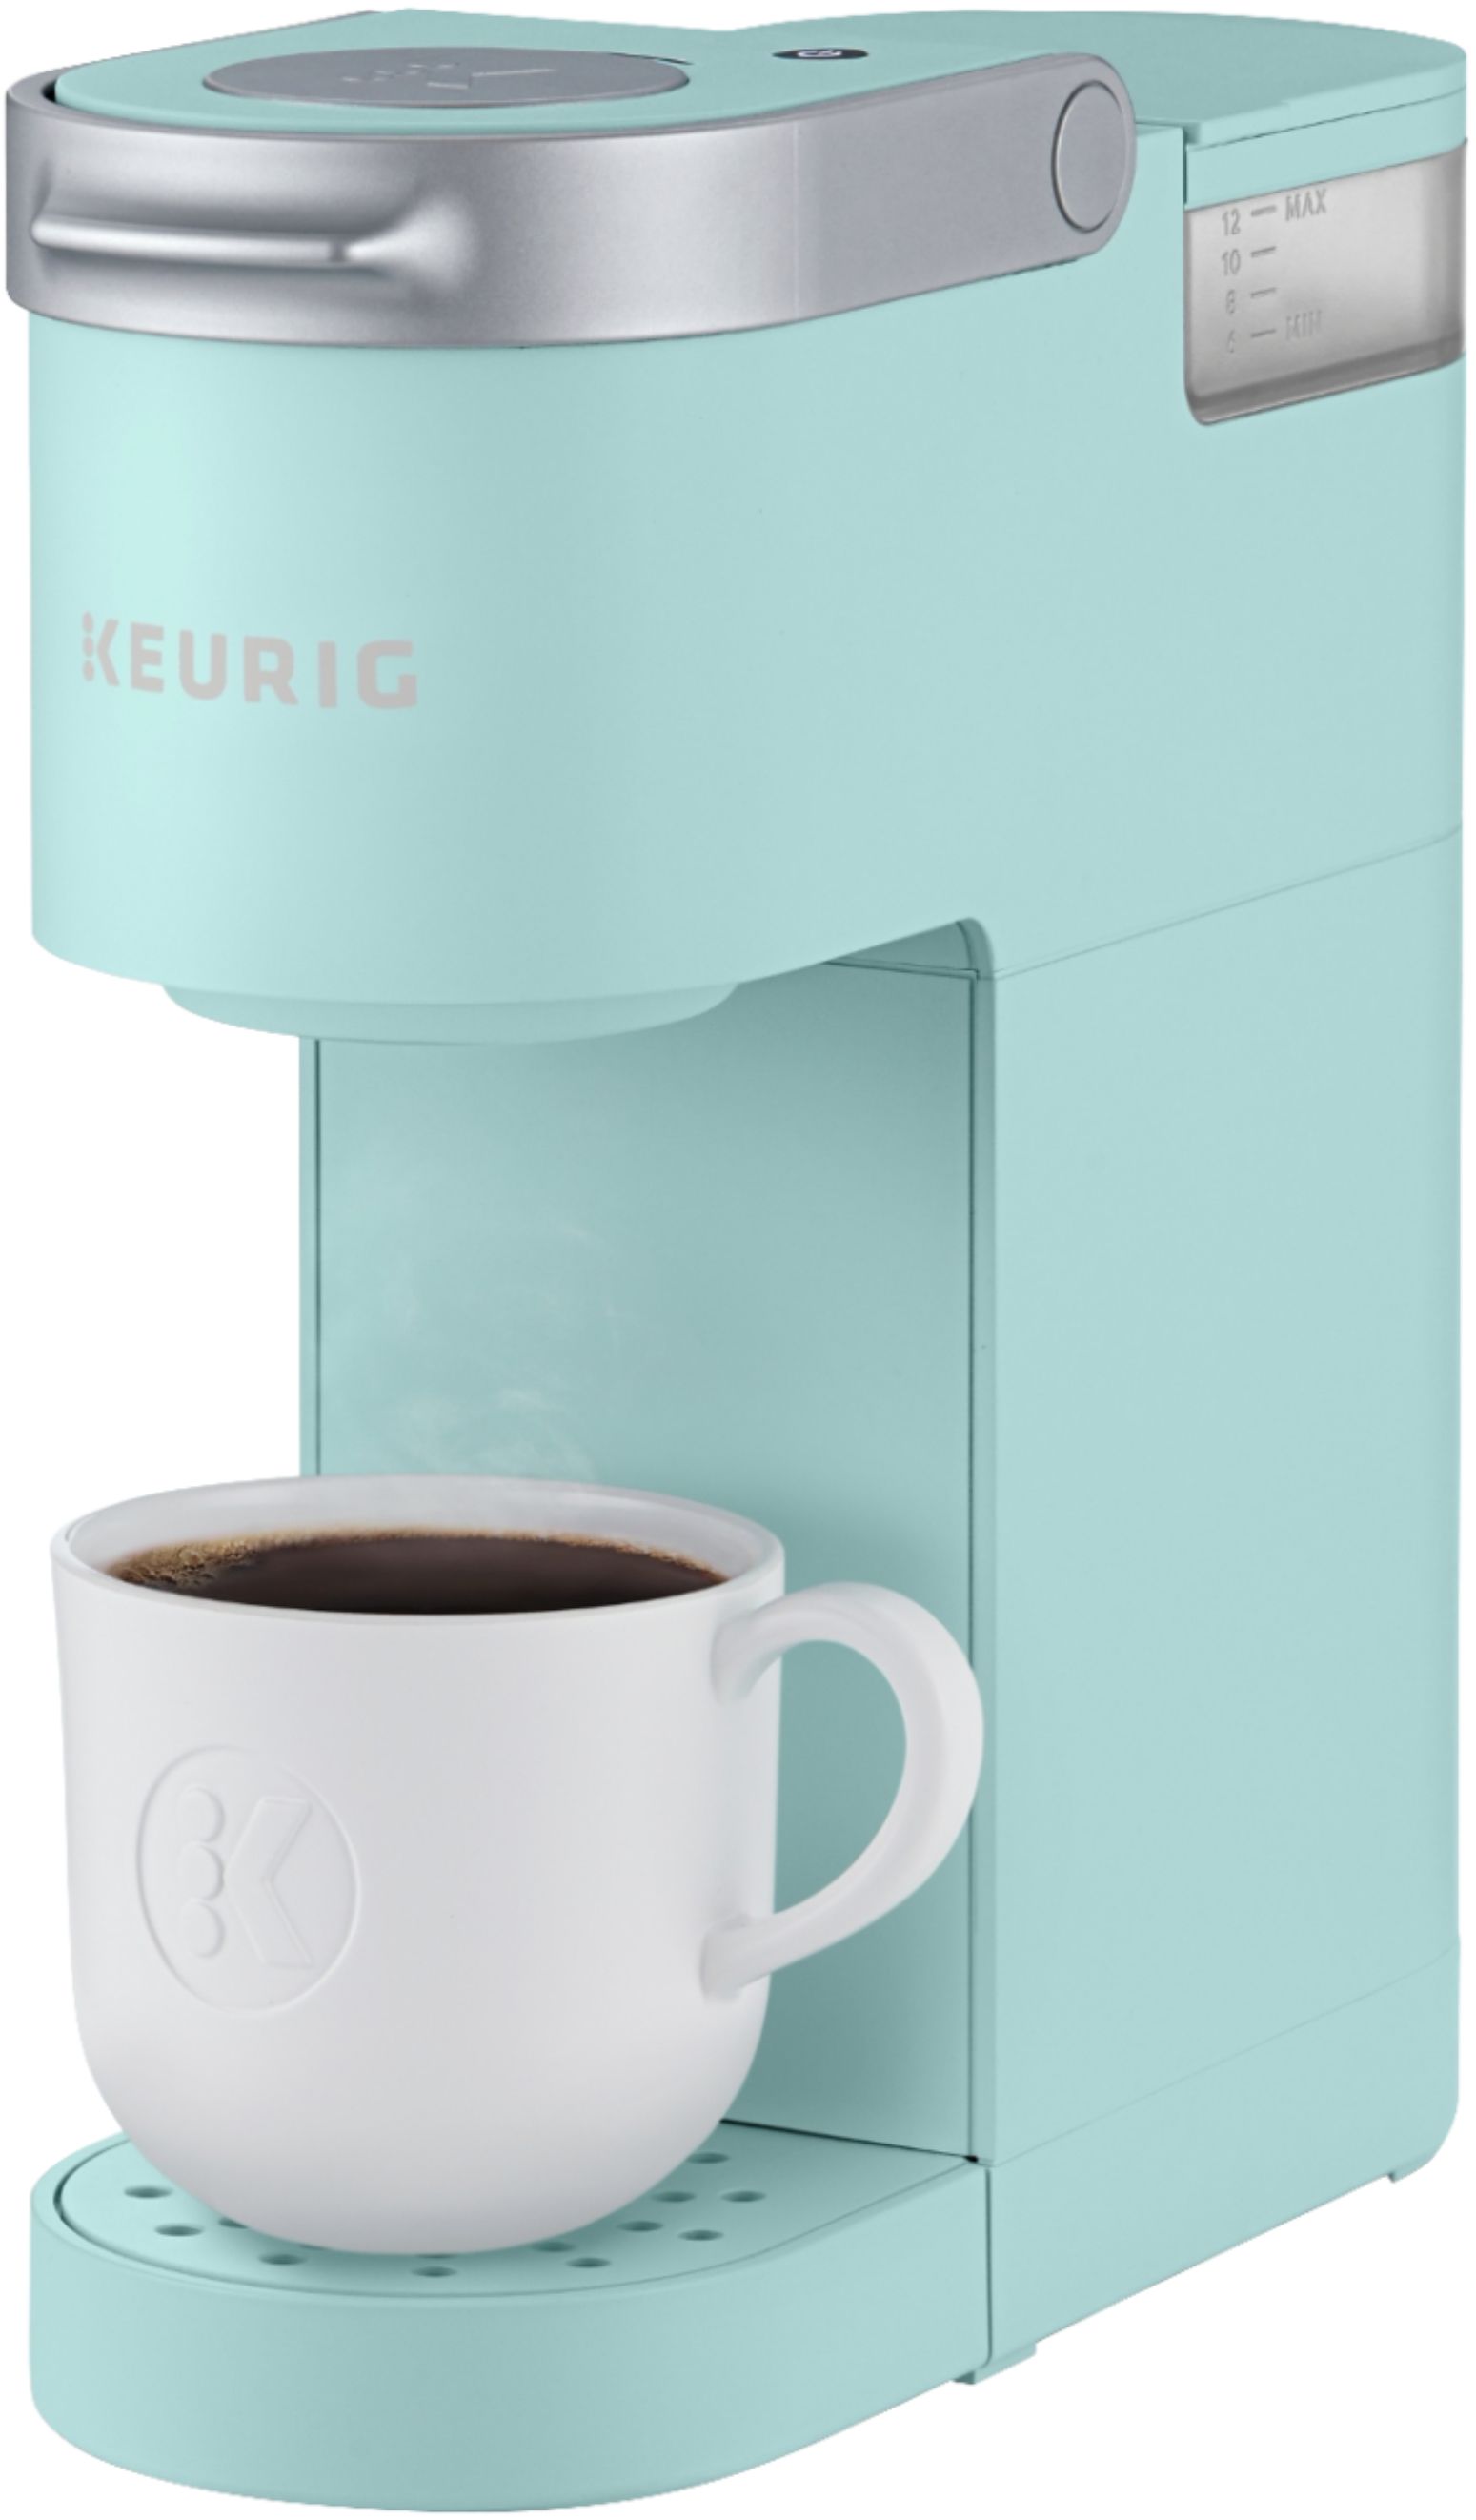 Mint Green Cuisinart Electric Tall Can Opener , Oasis/mint Green Kitchen,  Oasis Keurig, Pastel Green Smeg 